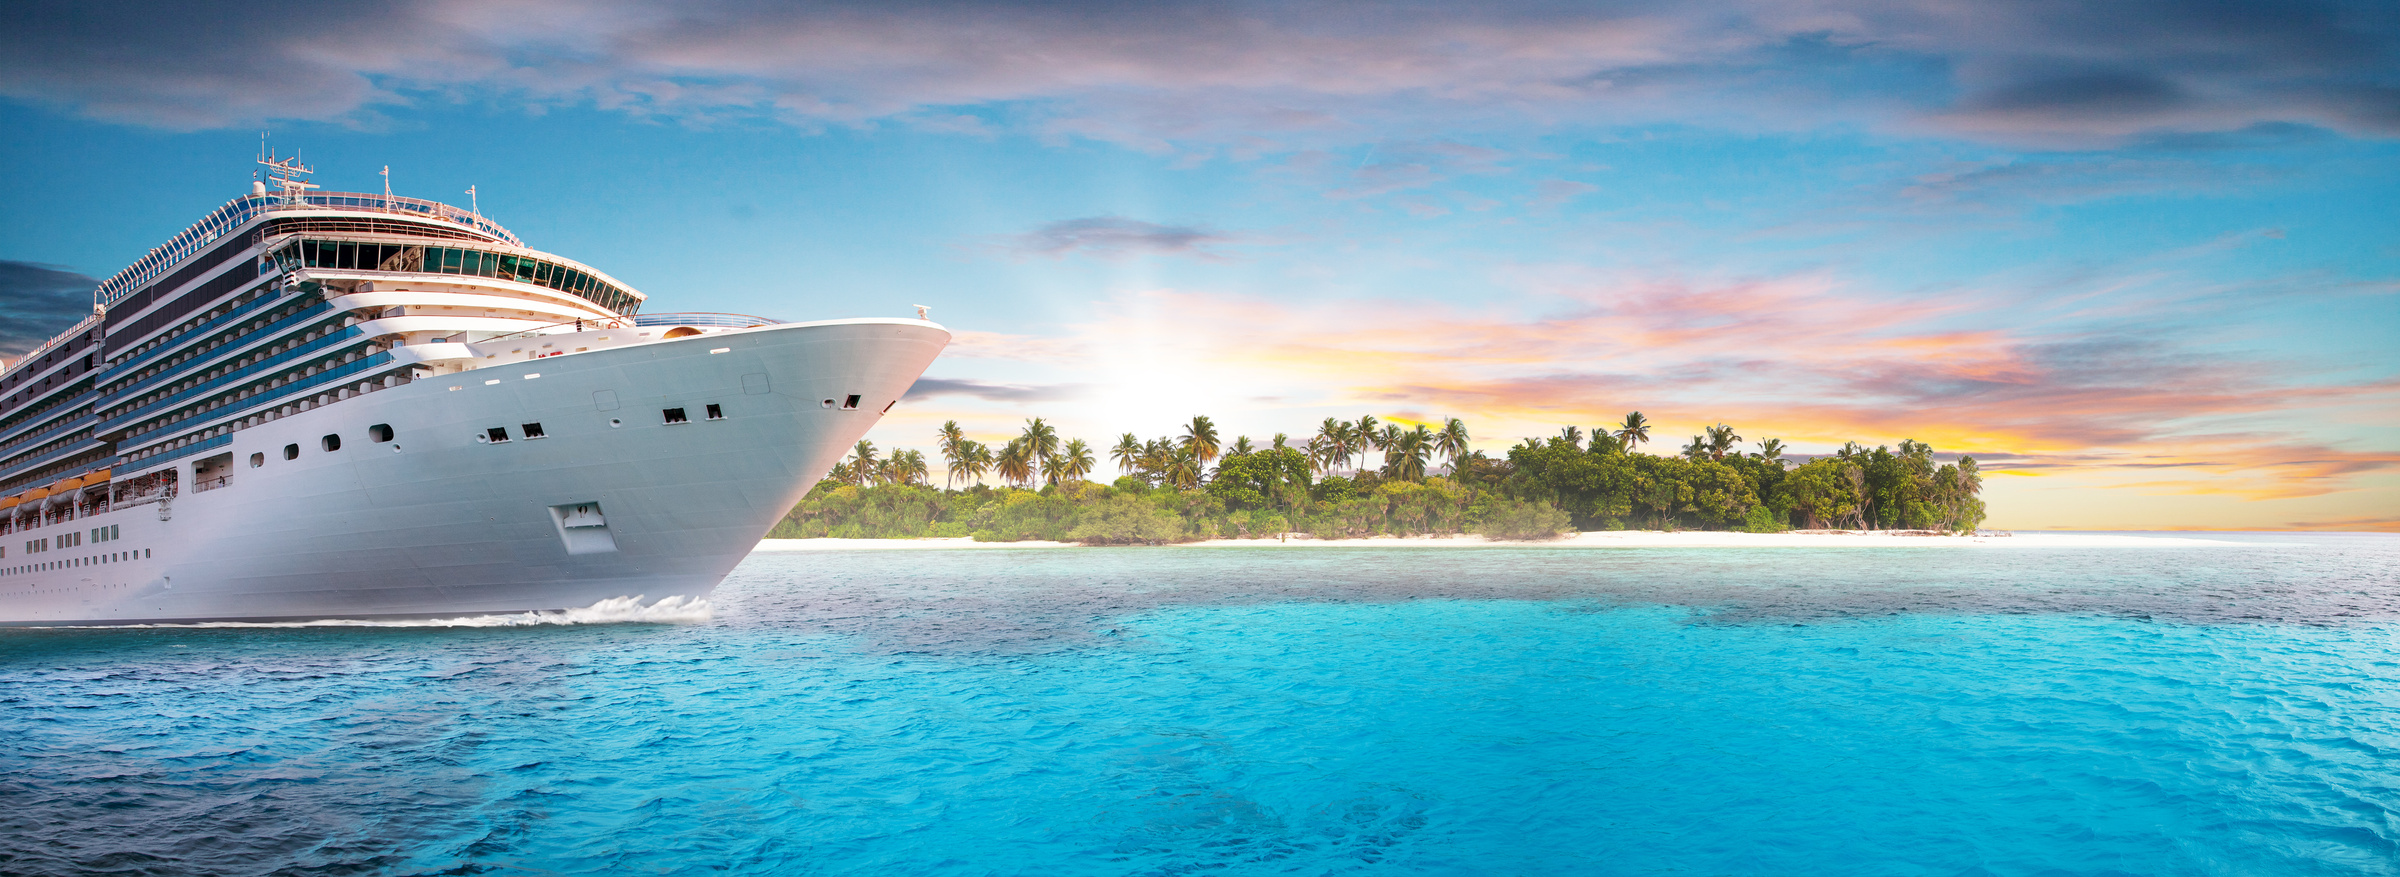 Luxury Cruise Boat with Tropical Island